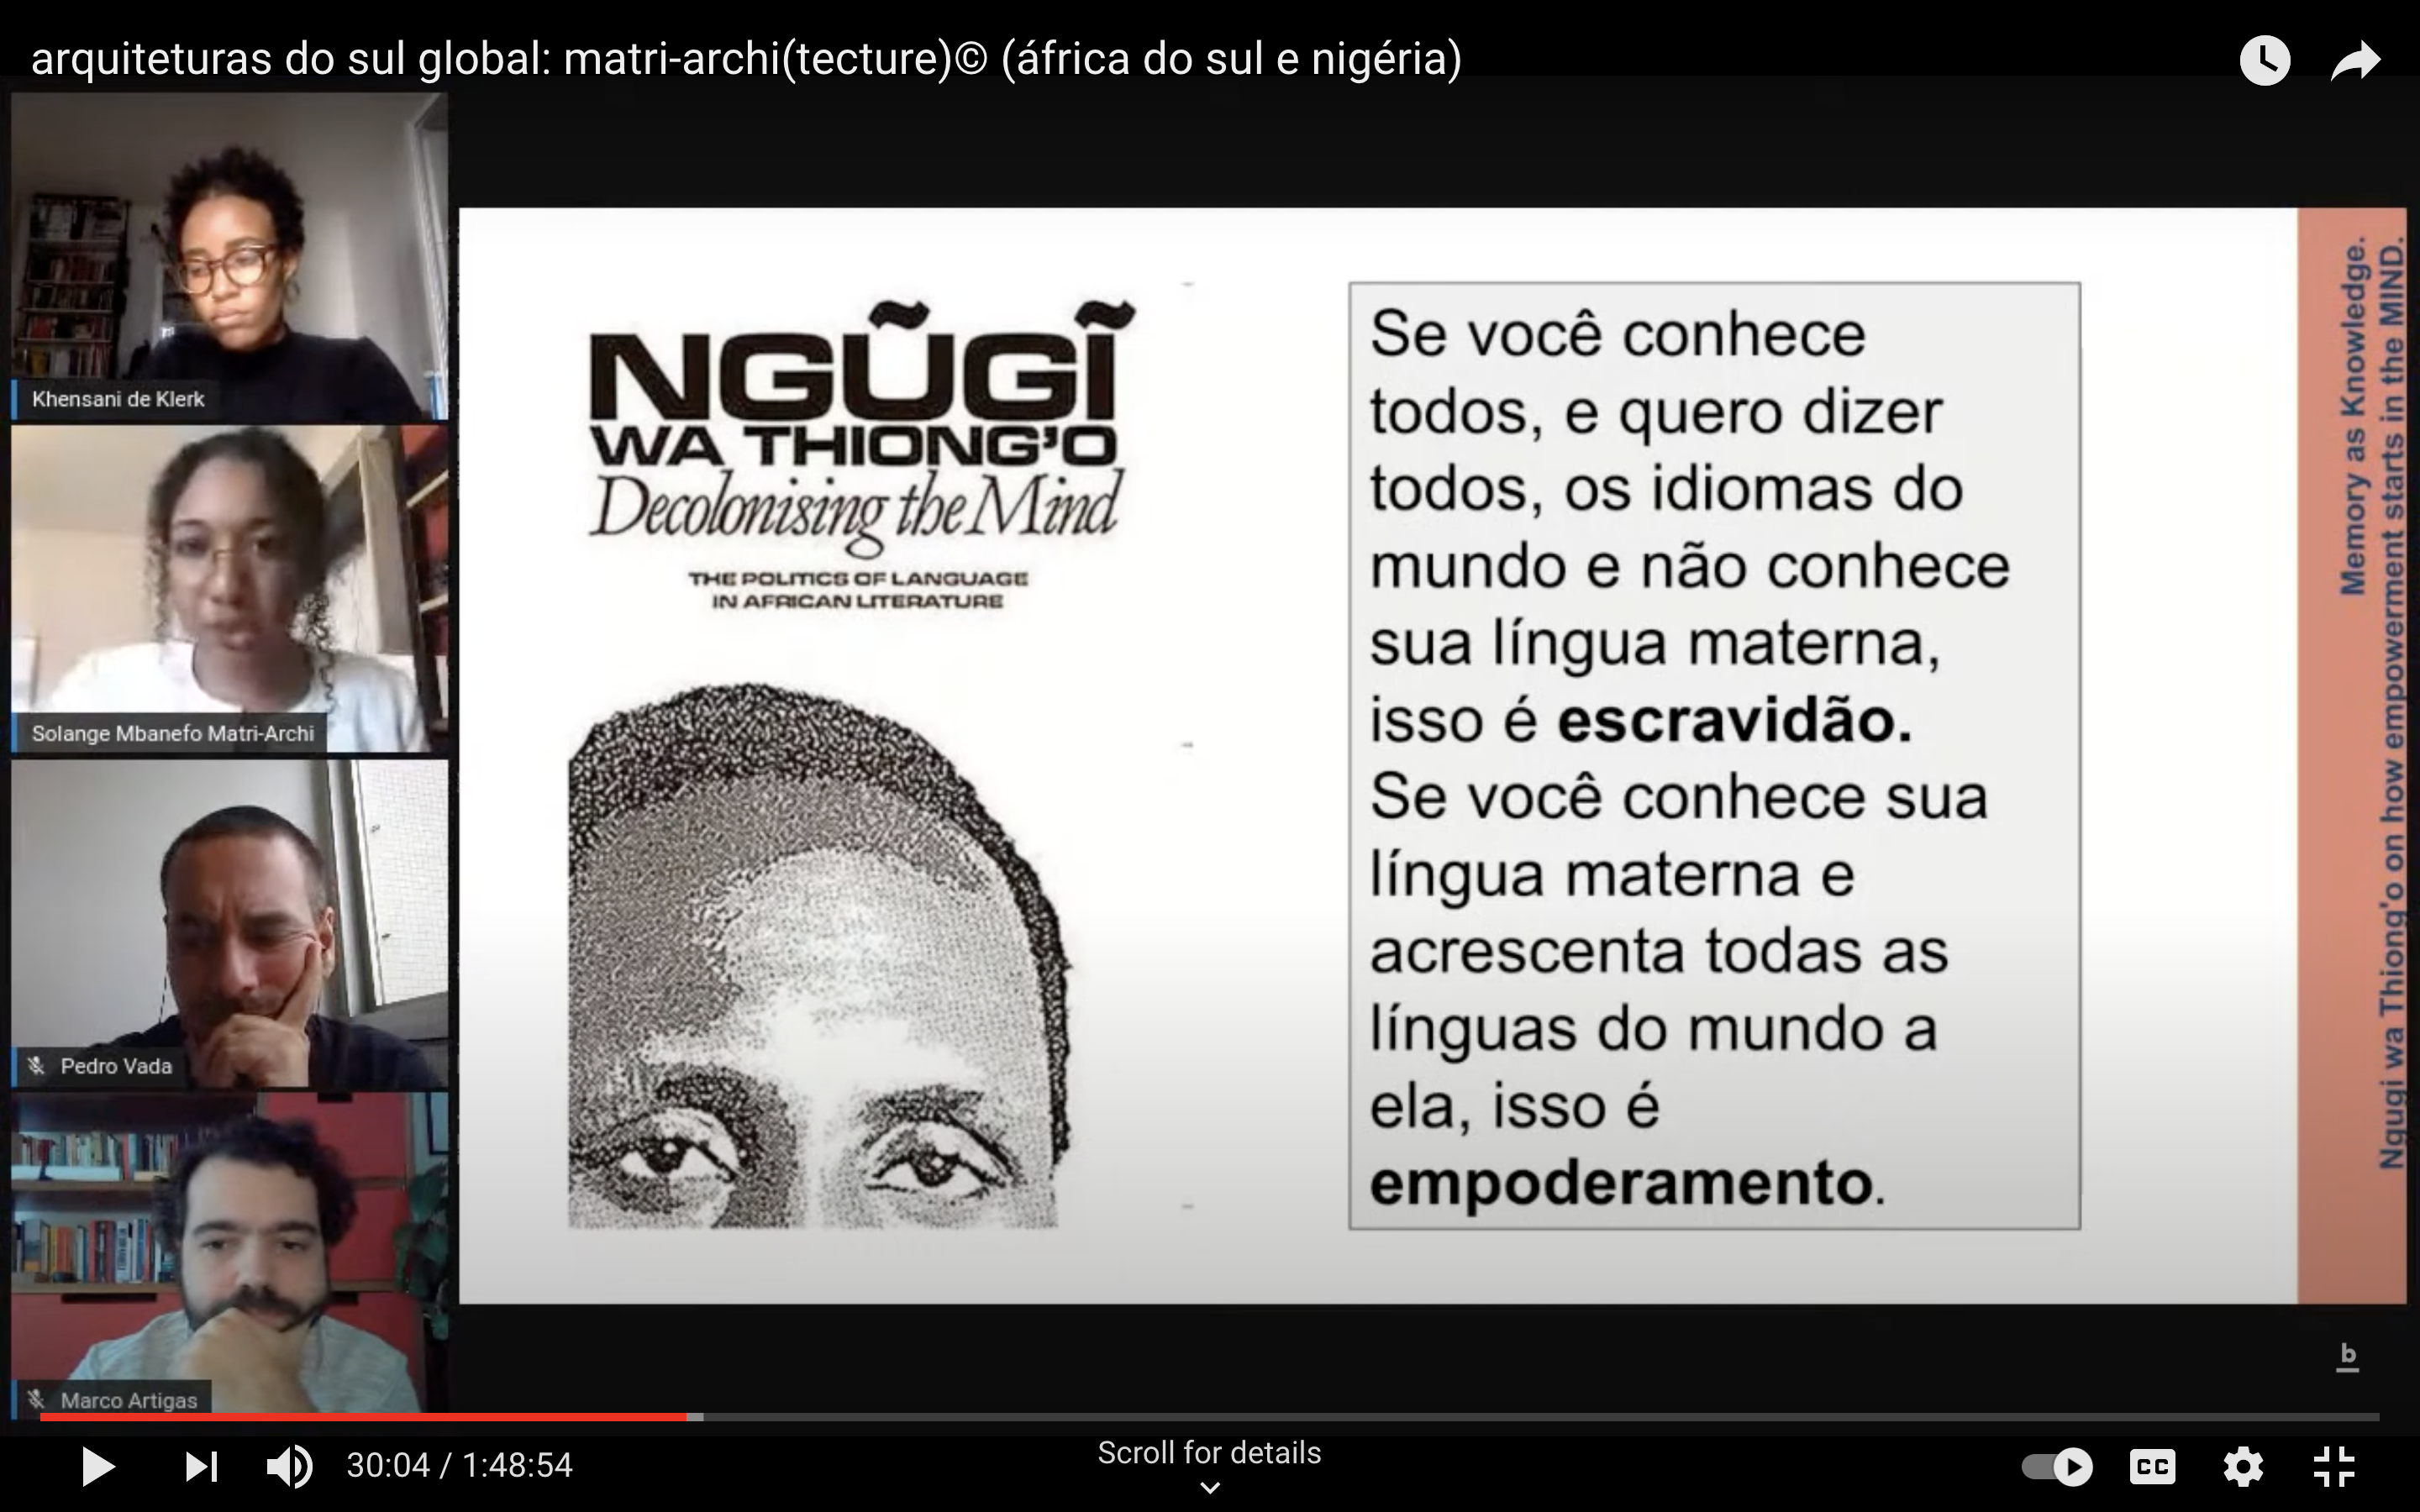 Image still from talk showing a quote from Ngugi Wa Thiongo.